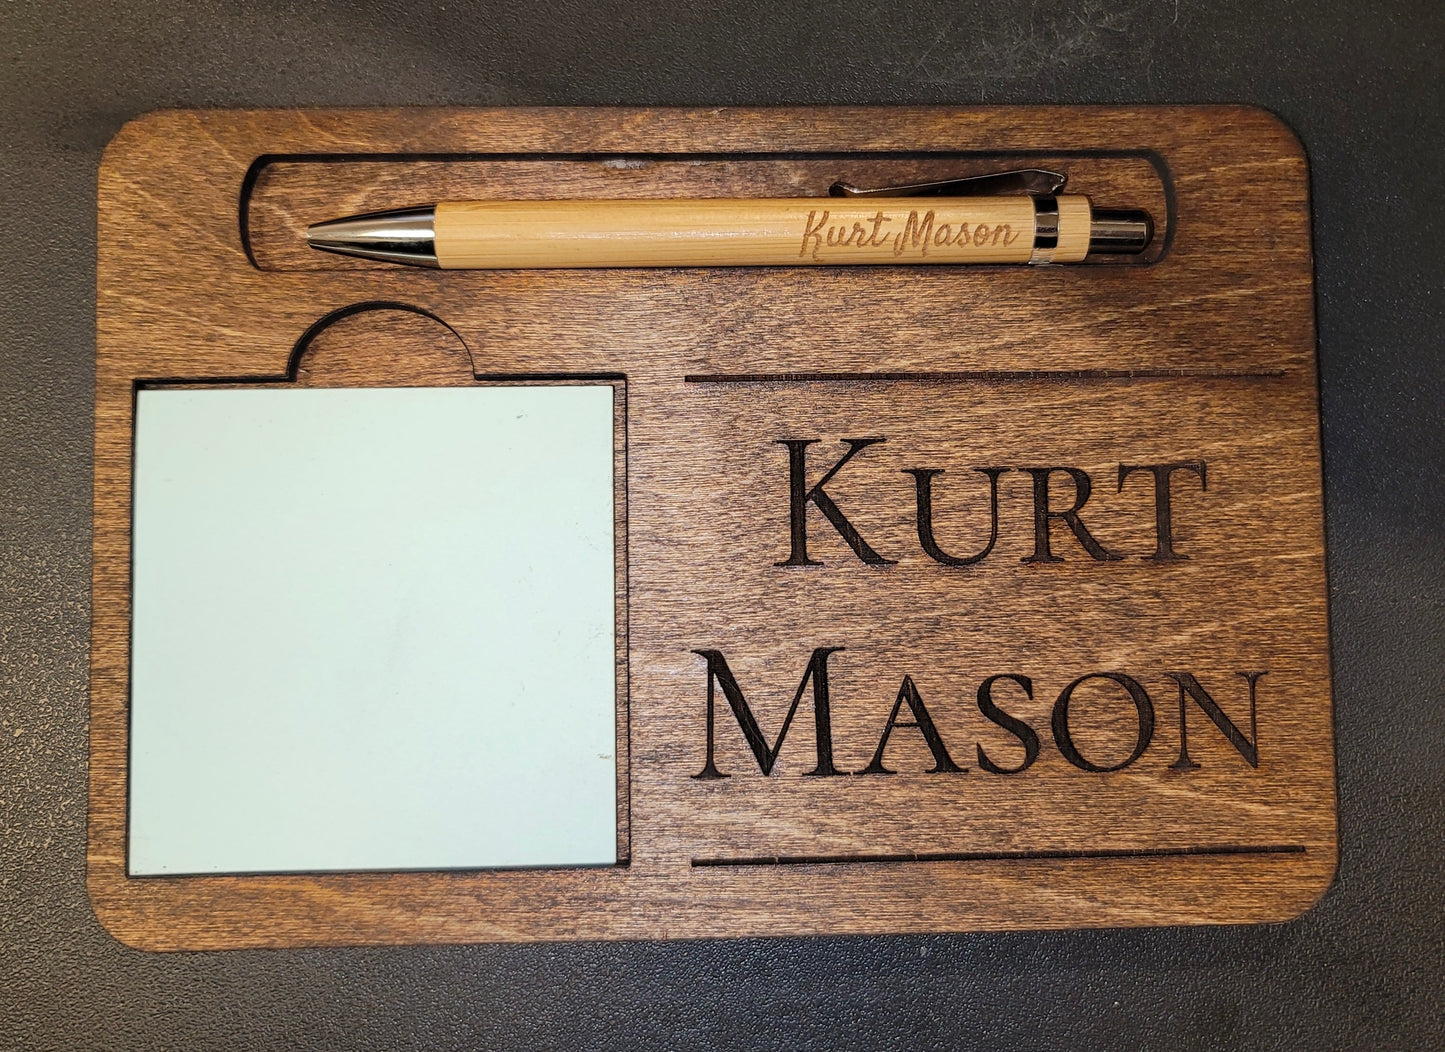 Personalized pen and sticky note holder